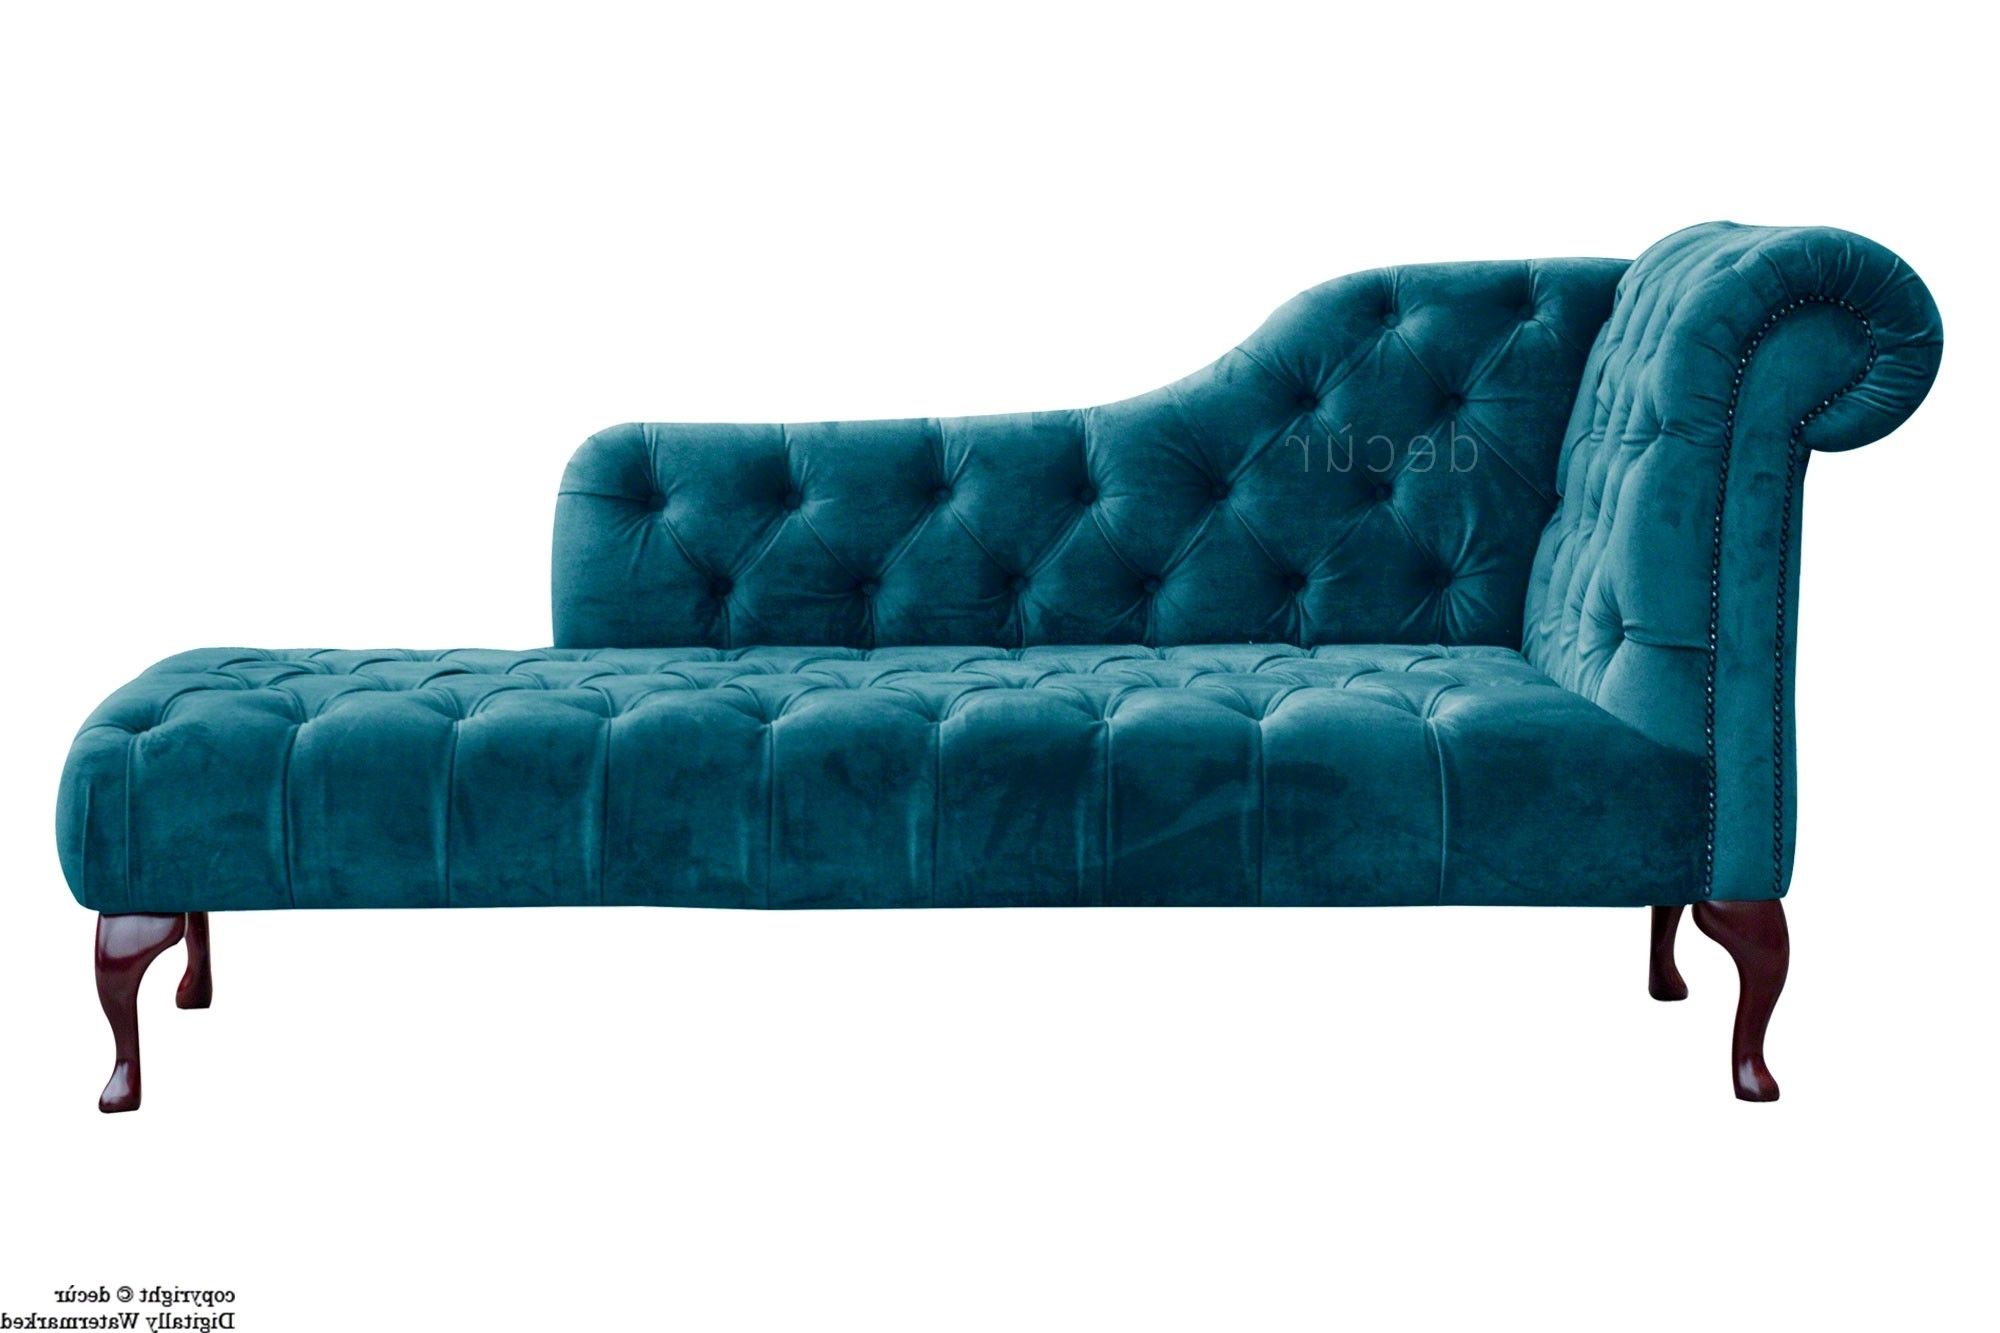 Bespoke Designer Sofas, Footstools, Bespoke Footstools, Bespoke Within Most Up To Date Teal Chaise Lounges (Photo 5 of 15)